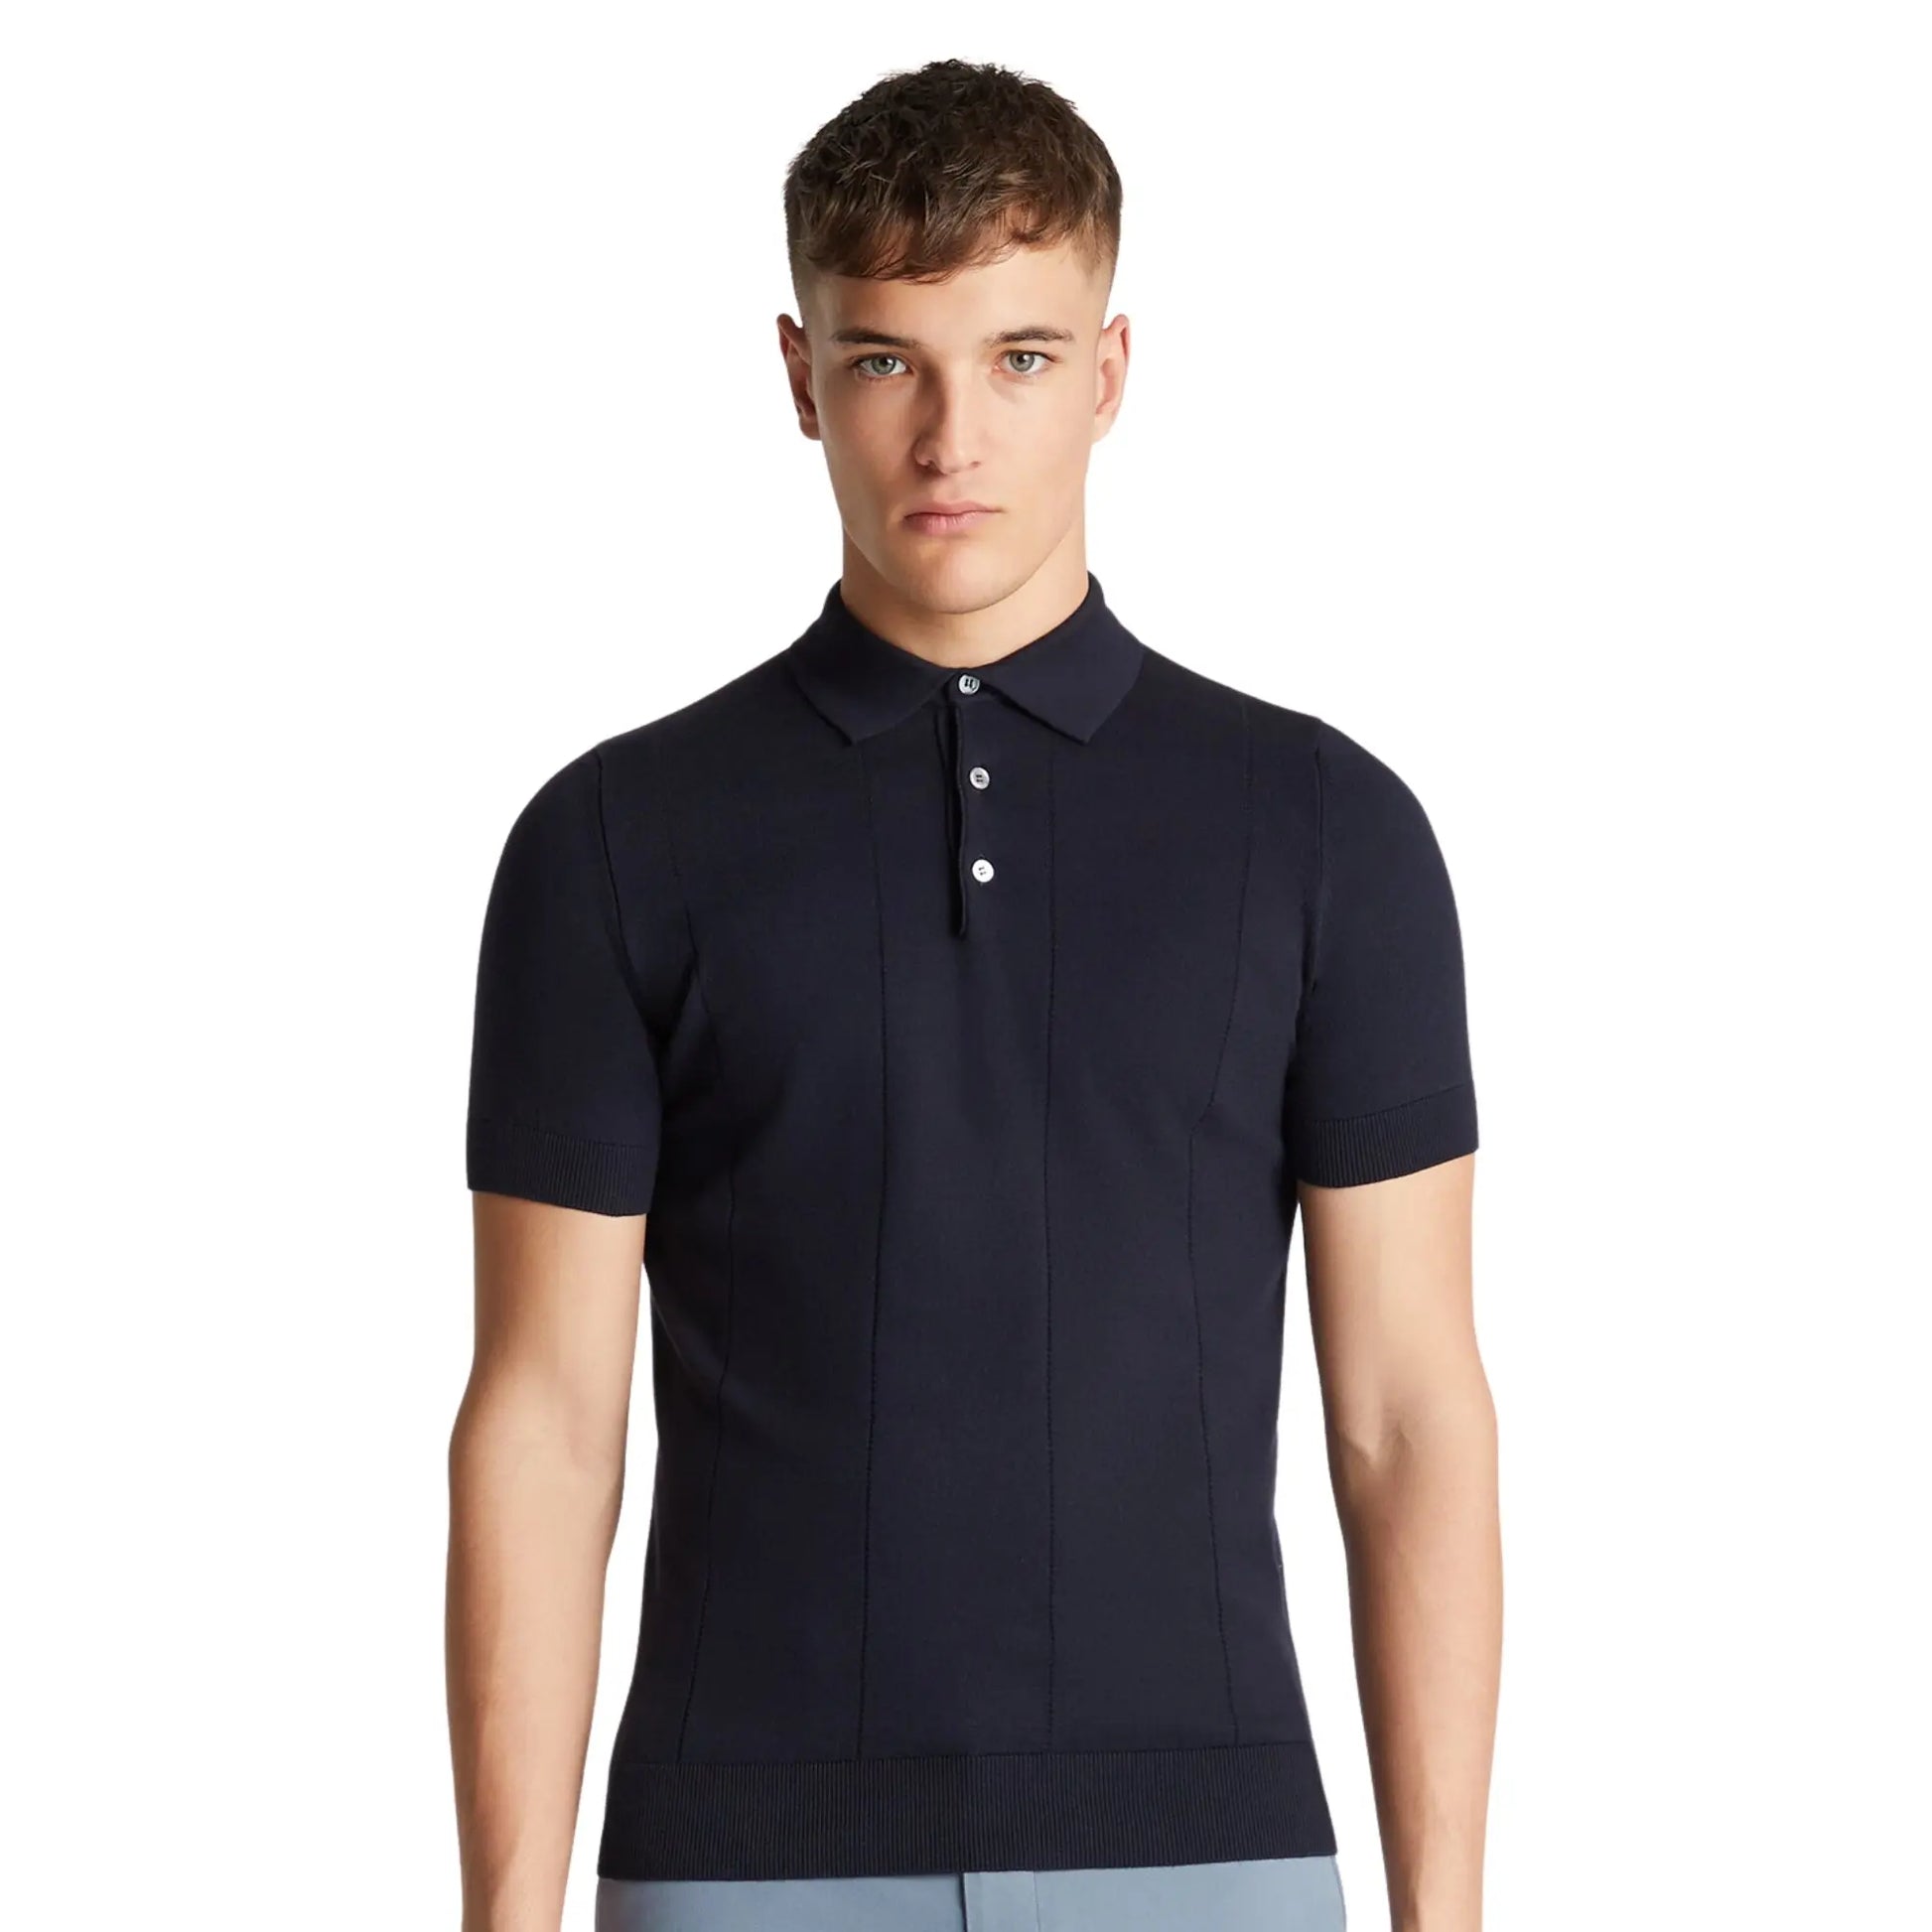 Buy Remus Uomo Knitted Polo - Navy | Short-Sleeved Polo Shirtss at Woven Durham